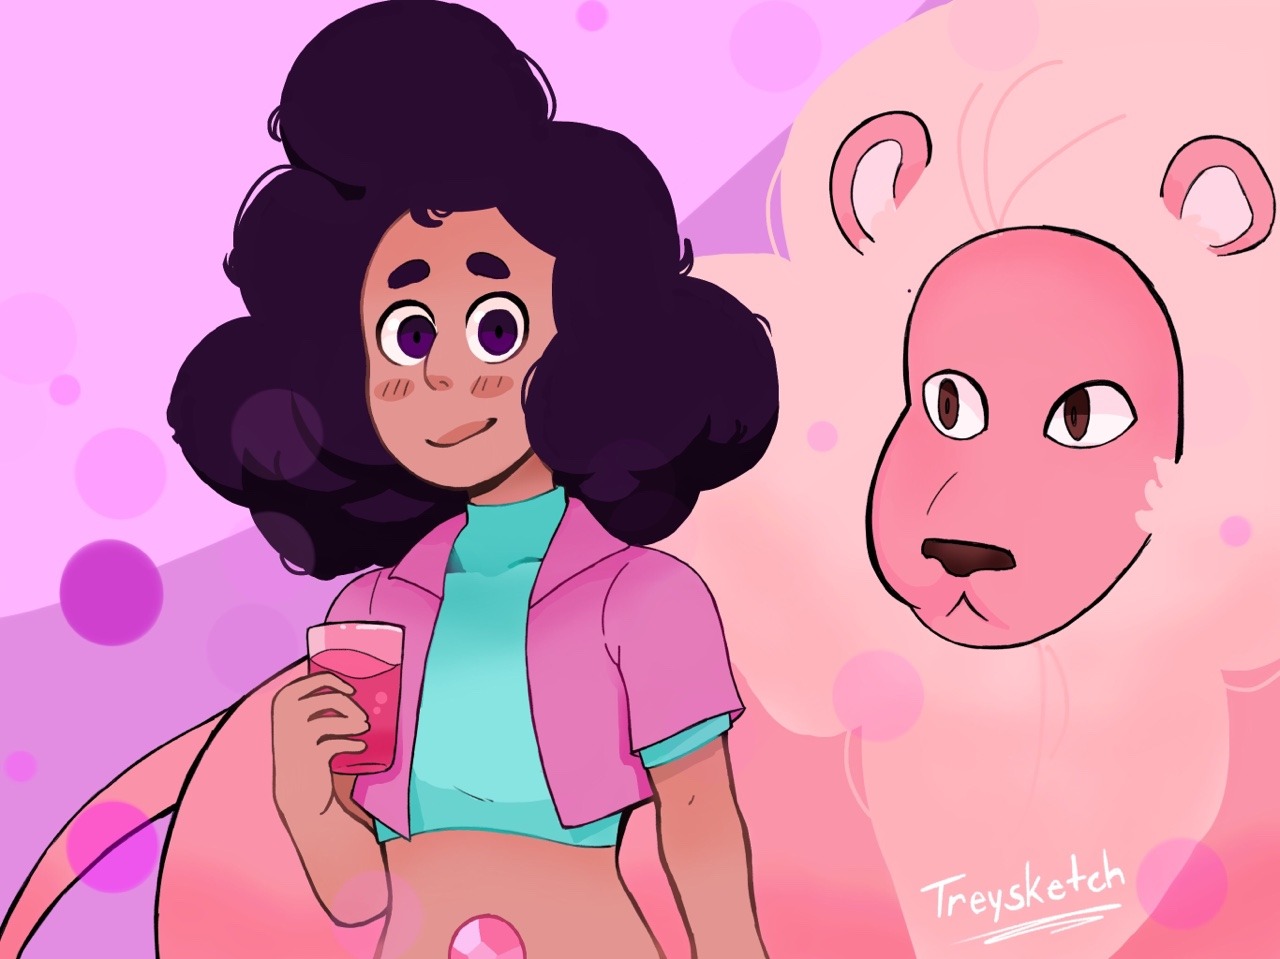 Stevonnie short hair, a thing literally everyone wanted after seeing Connie’s new haircut. (I’m so late on posting this but I hope y’all enjoy)